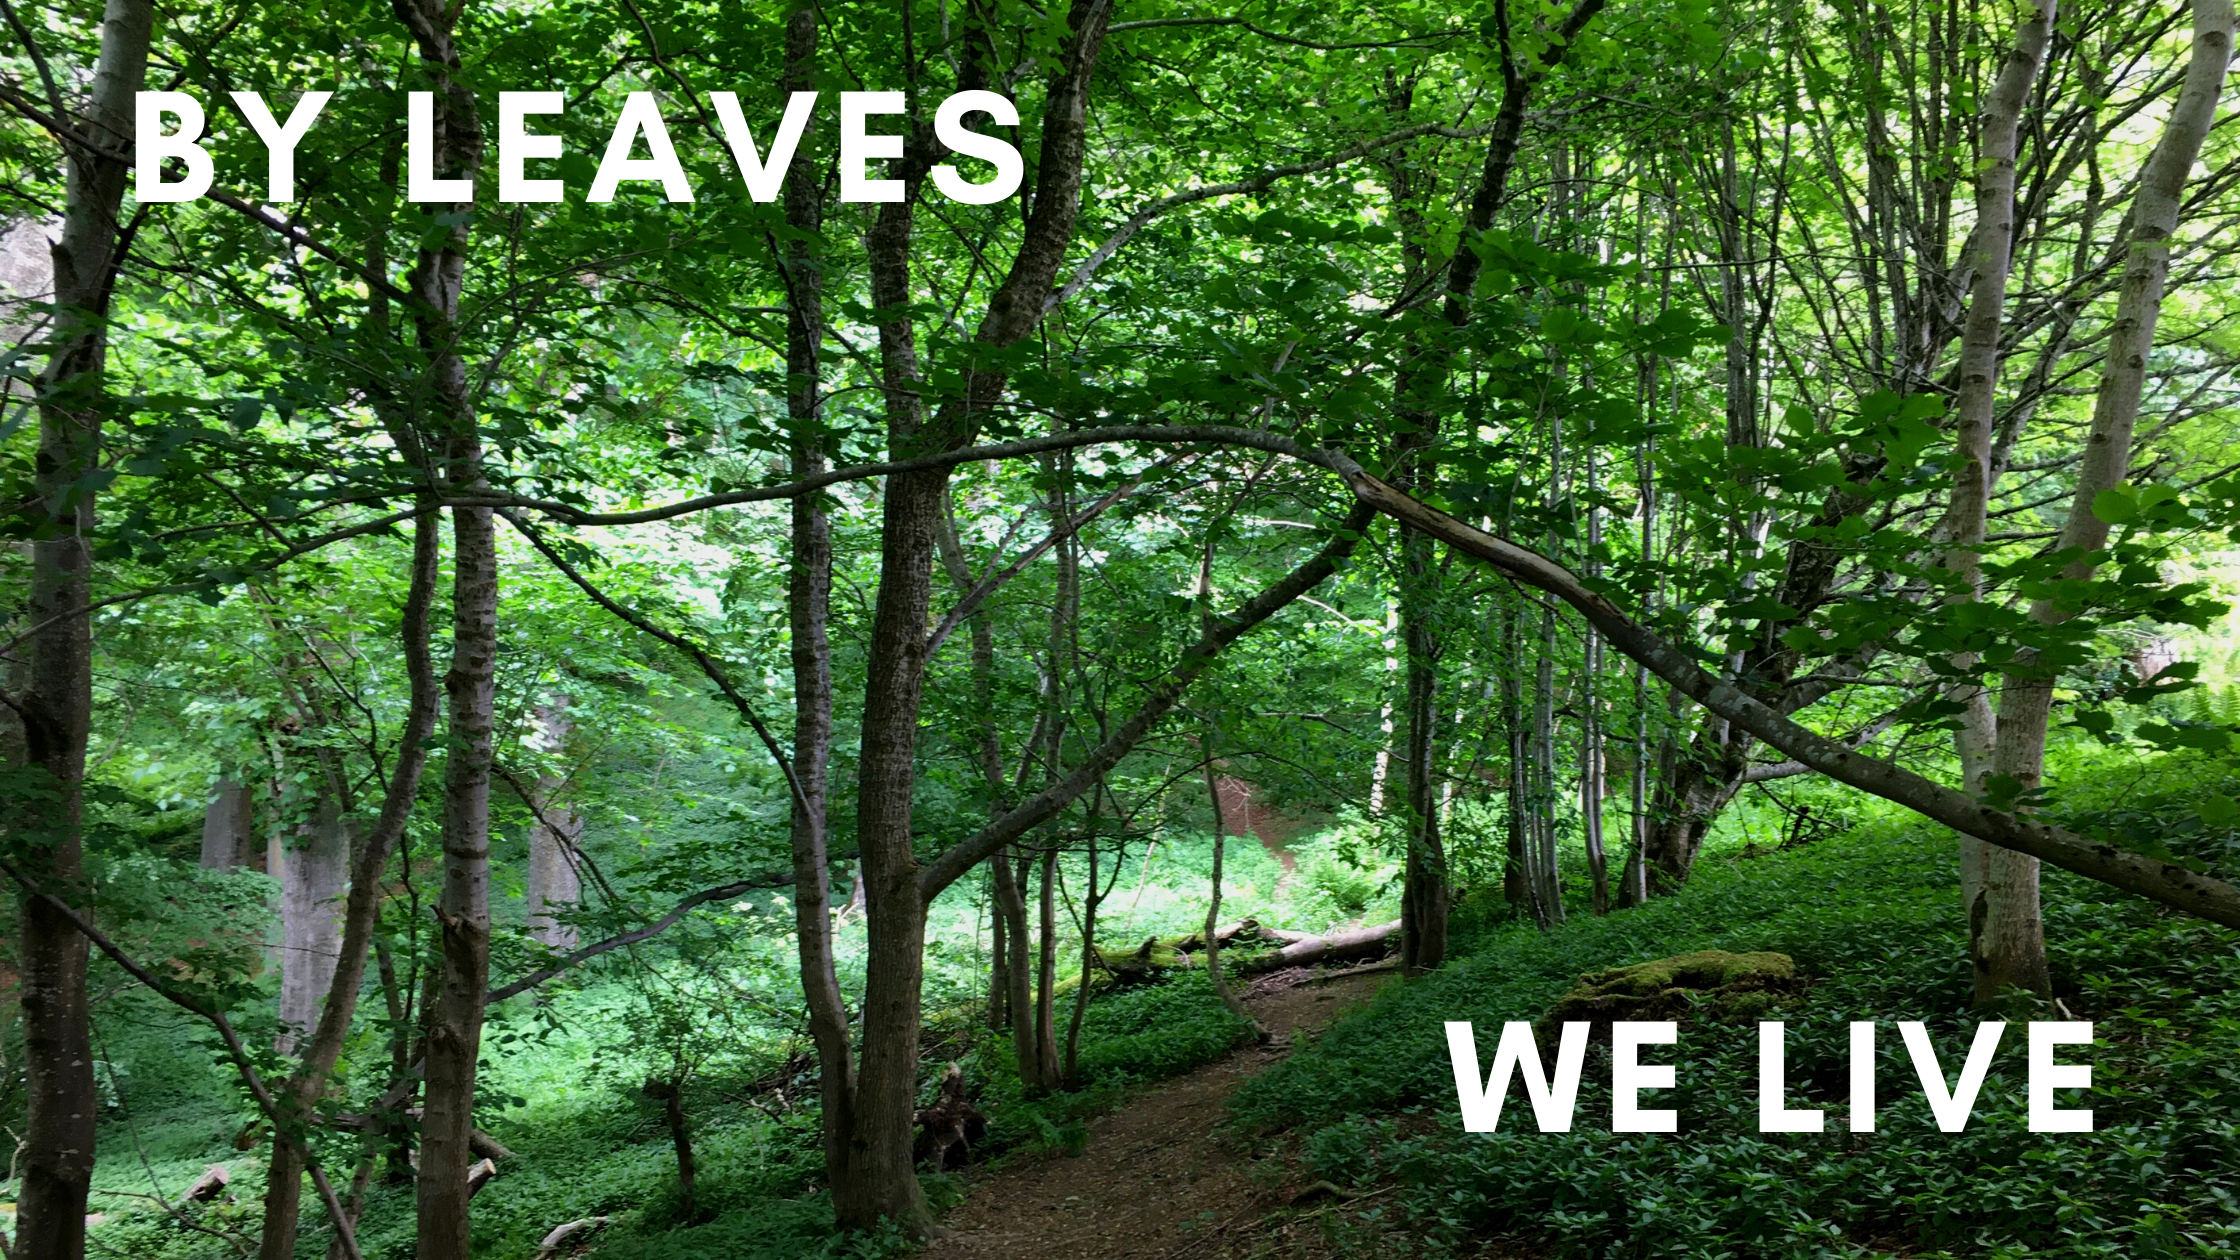 By leaves we live